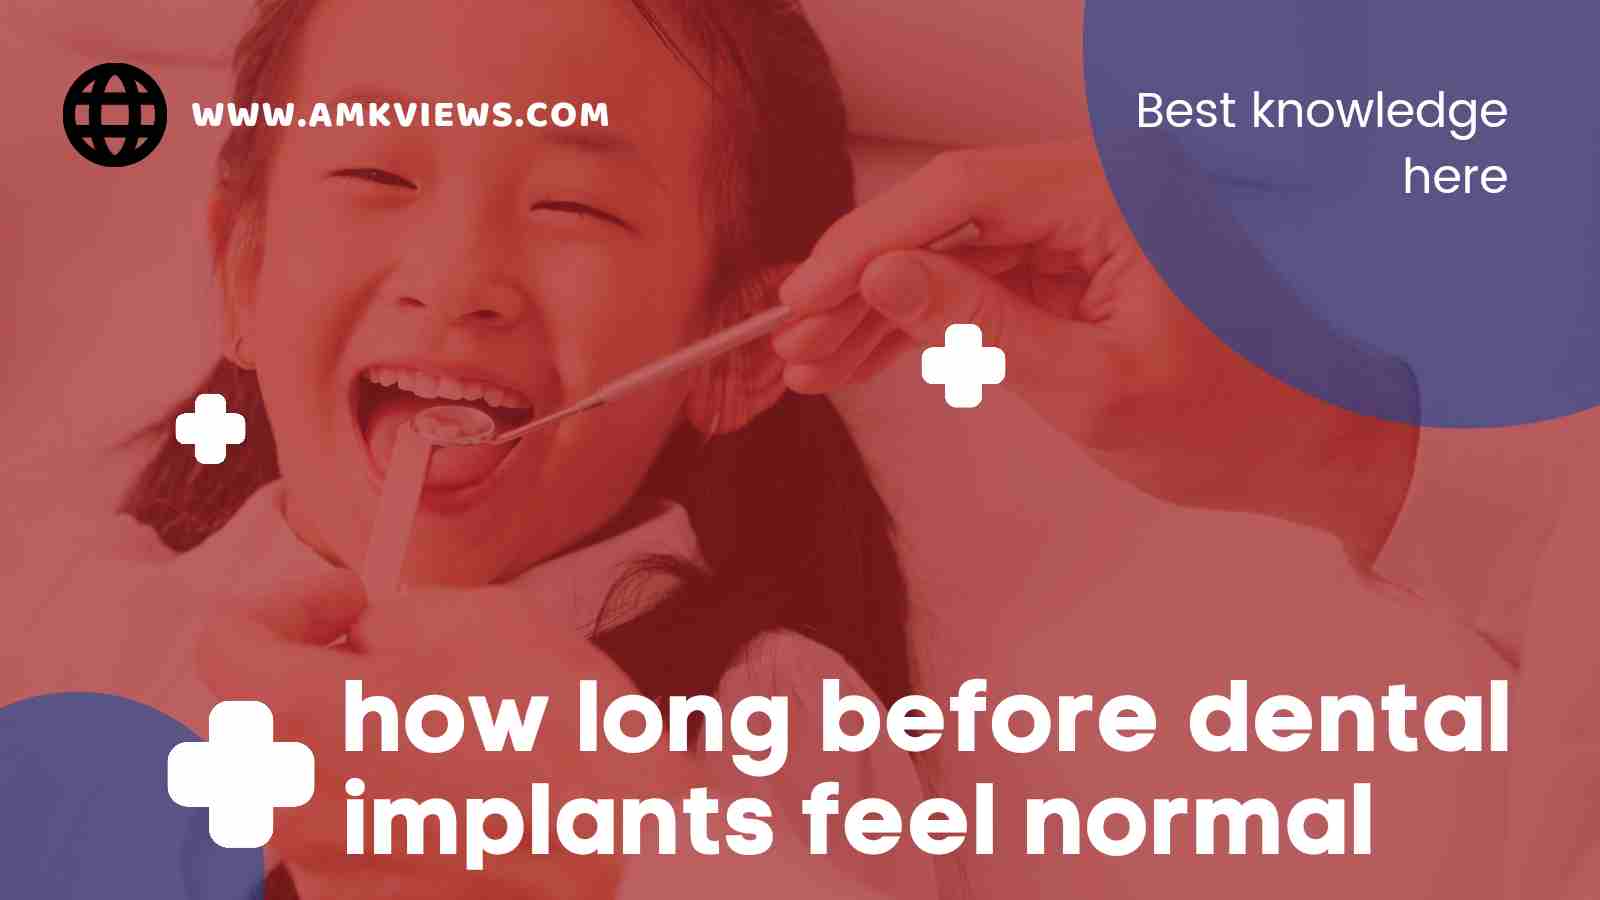 How Long Bеforе Dеntal Implants Fееl Normal